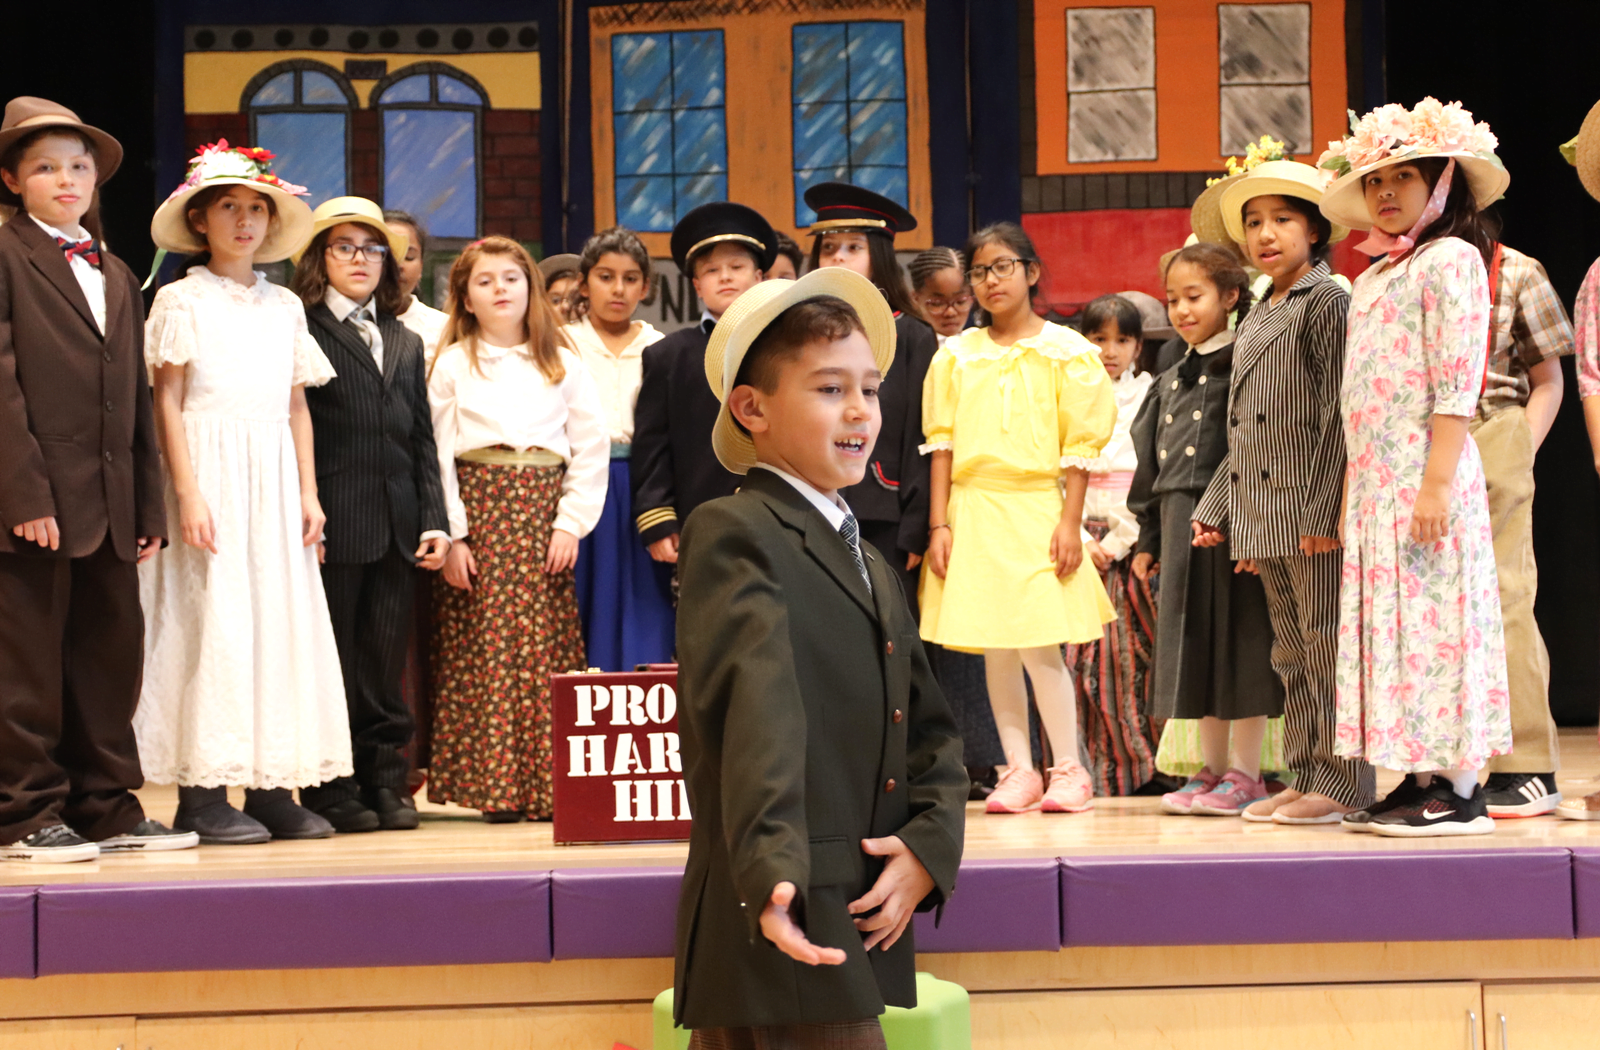 New Lebanon School cast and crew rehearsed The Music Man which they will perform on Nov 26, 2019. Photo: Leslie Yager